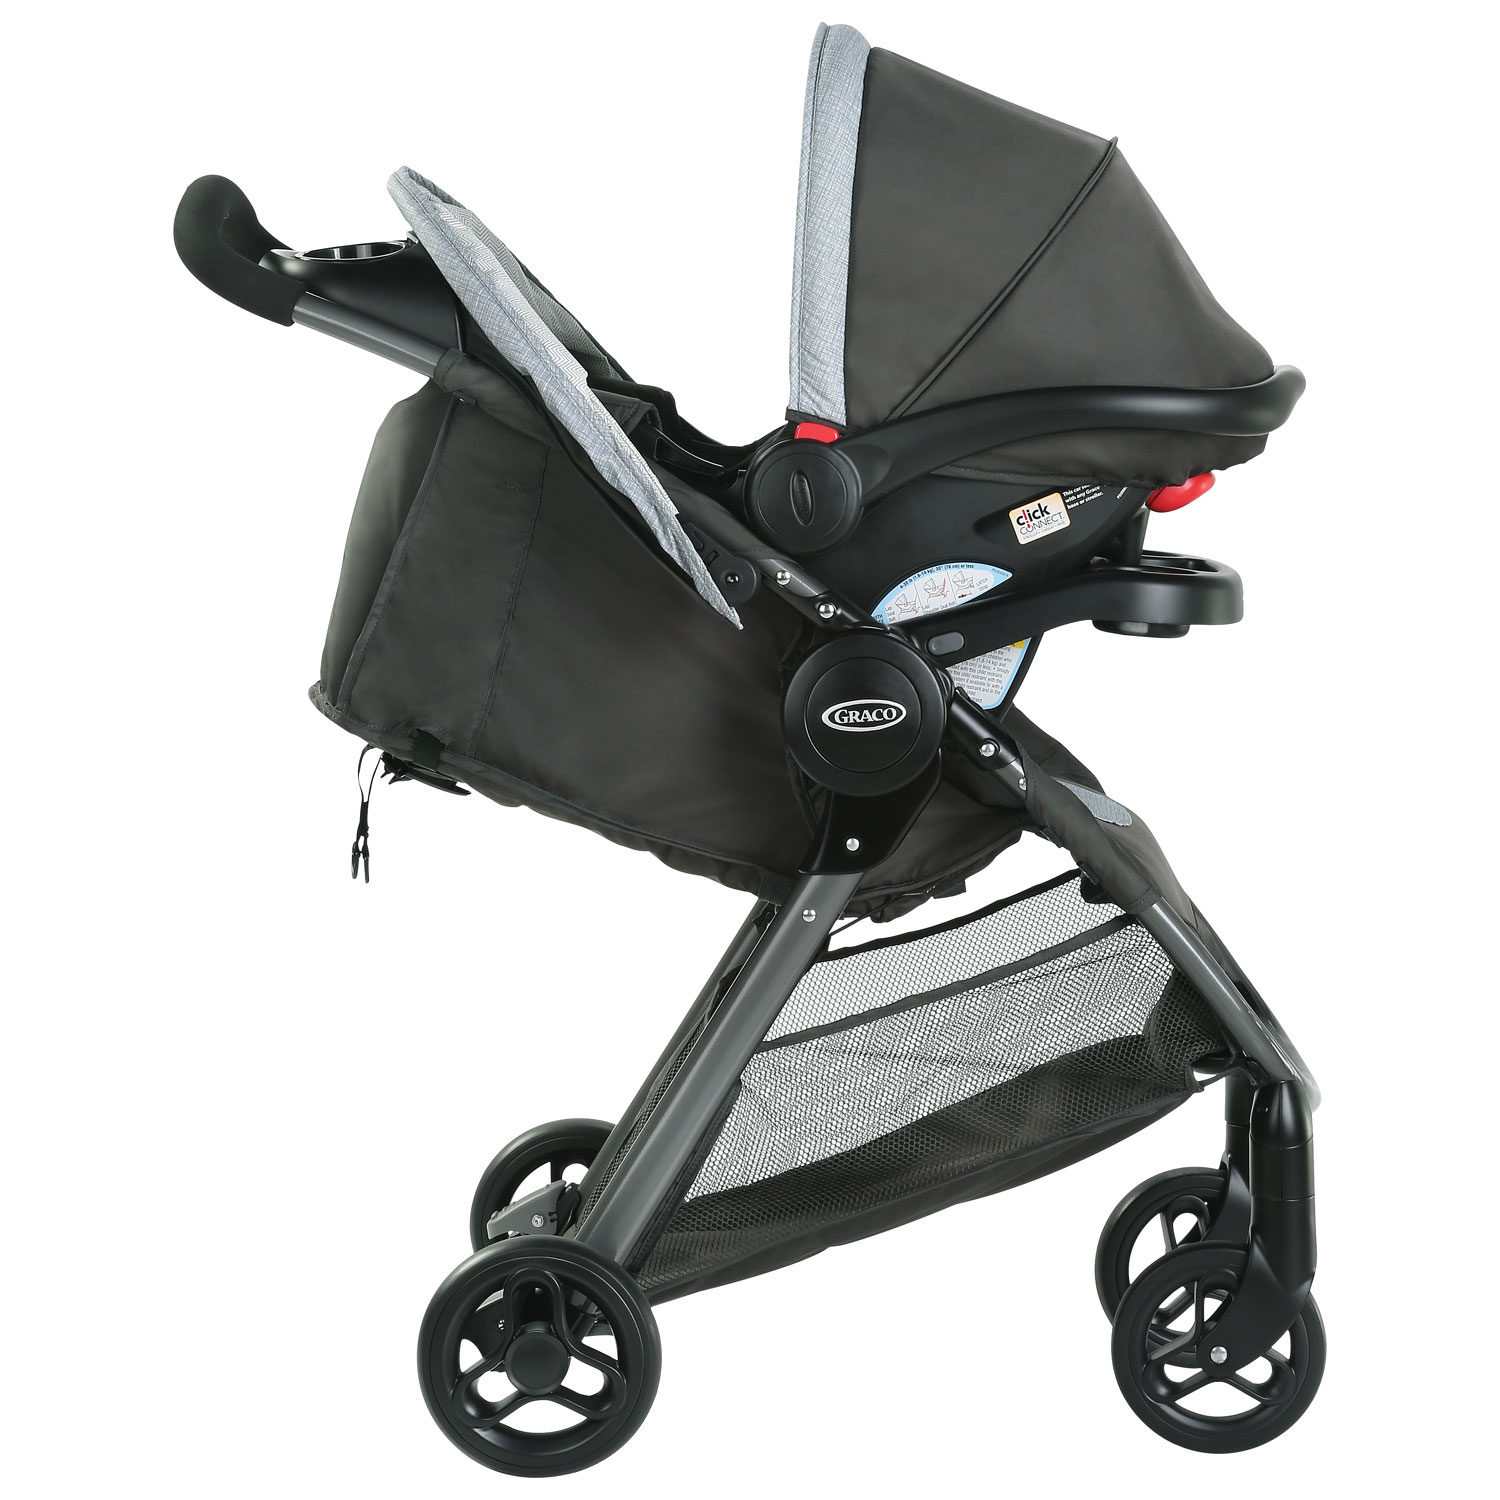 graco fast action se